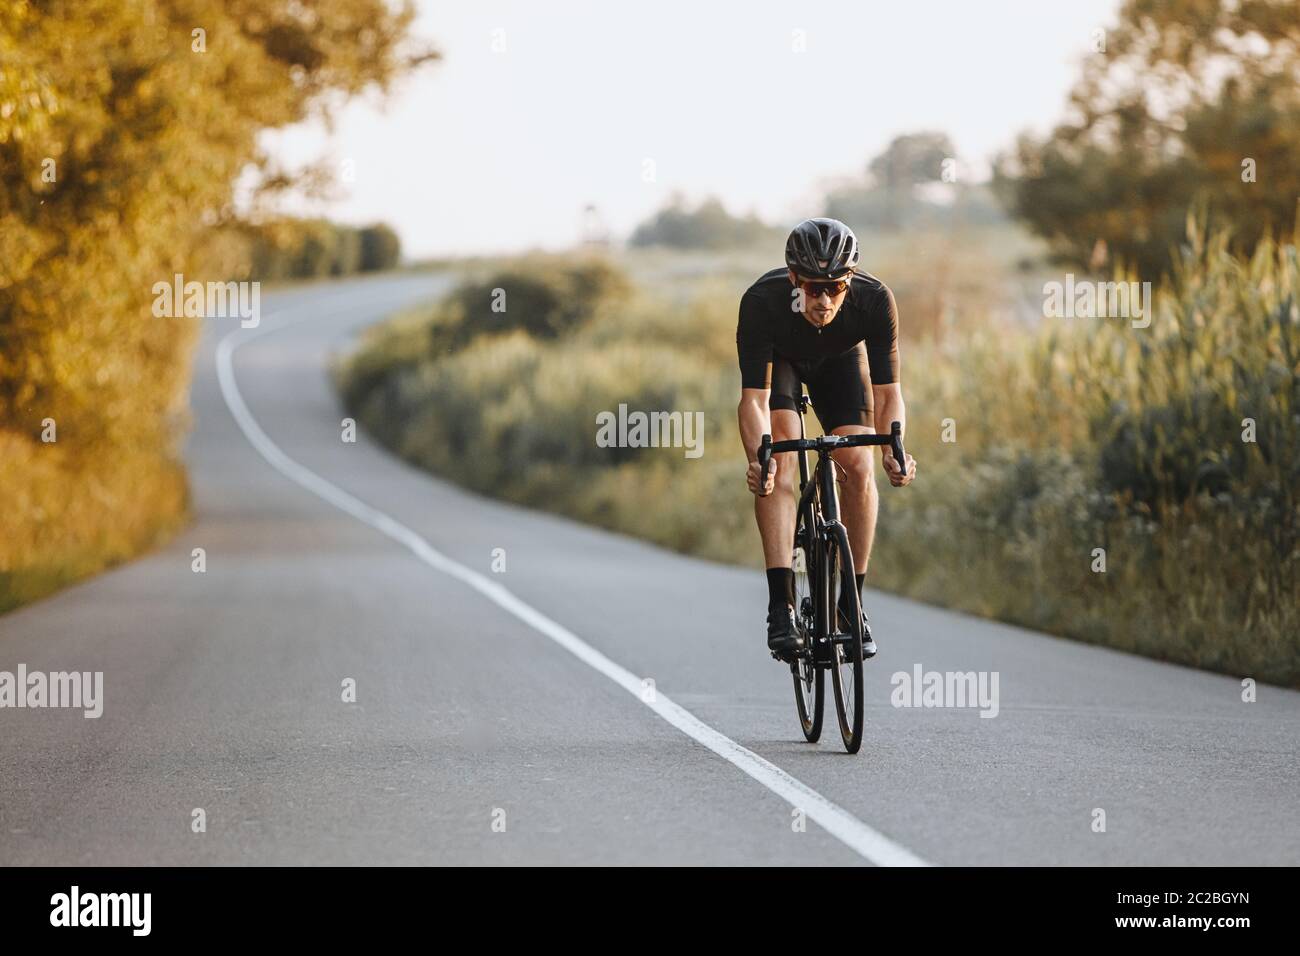 Professional male cyclist in black helmet, protective glasses and activewear dynamically riding bicycle on paved road with blur background. Concept of Stock Photo